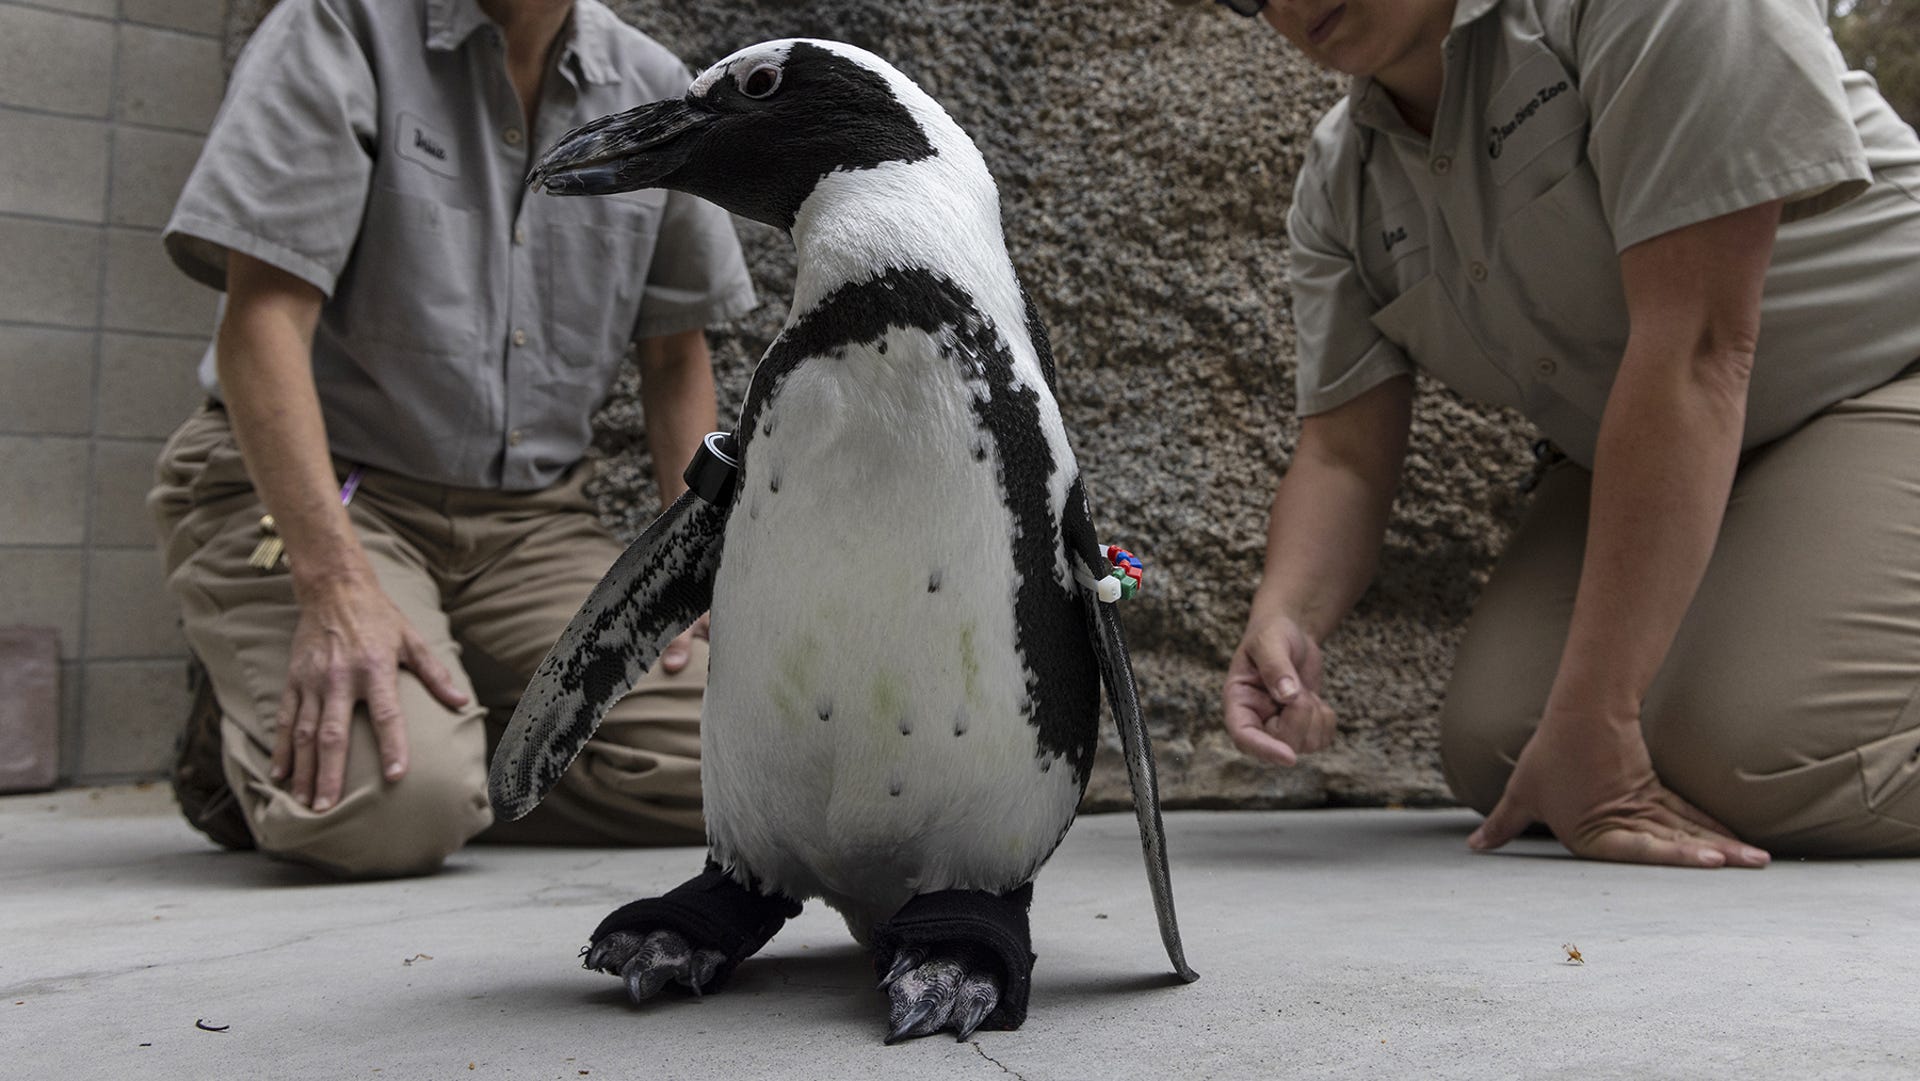 A penguin wears custom orthotic shoes as two San Diego Zoo staff members watch him.